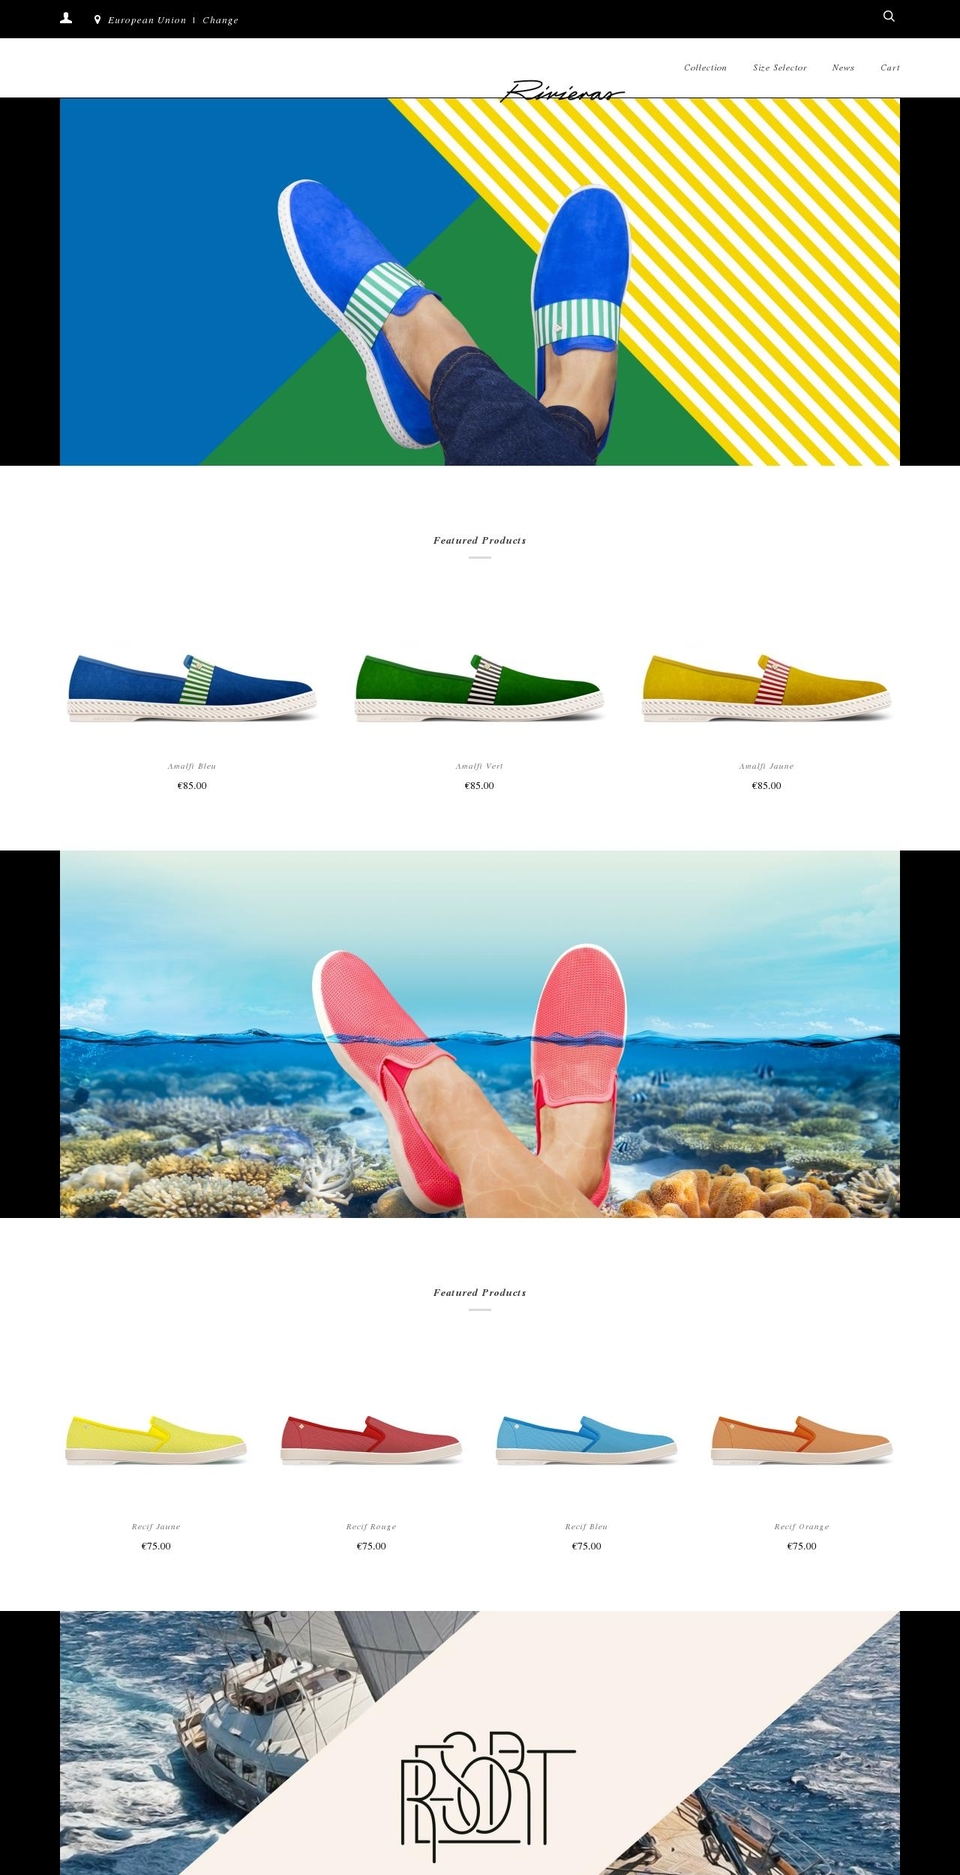 Rivieras [Plus]-TH-July-30-2018 Shopify theme site example rivieras-resort.be